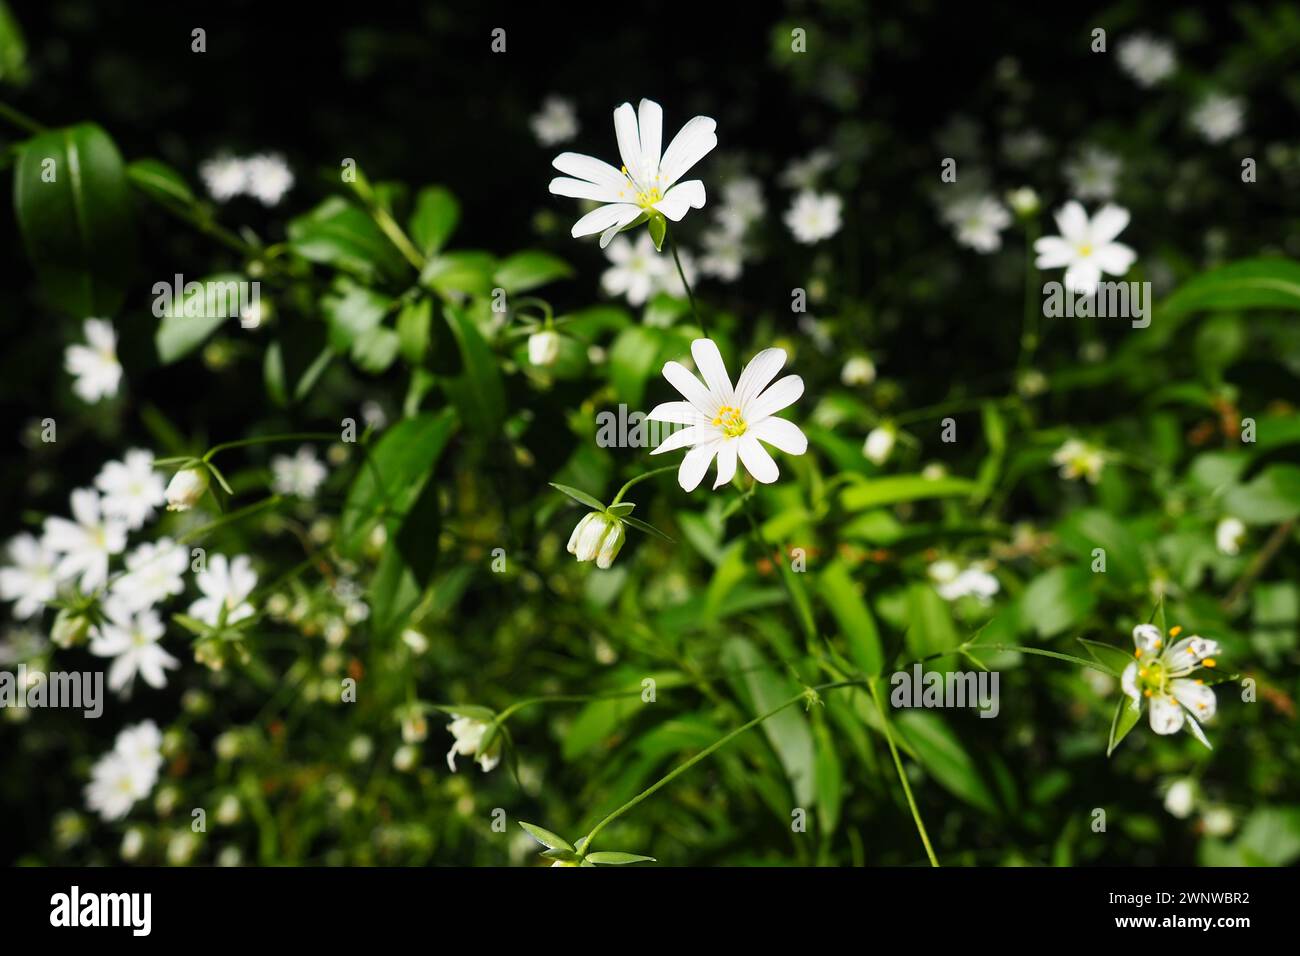 Starflower Stellaria is a genus of flowering plants in the Carnation family. Wood louse plant. White flowers in the forest. Fruska Gora, Serbia Stock Photo